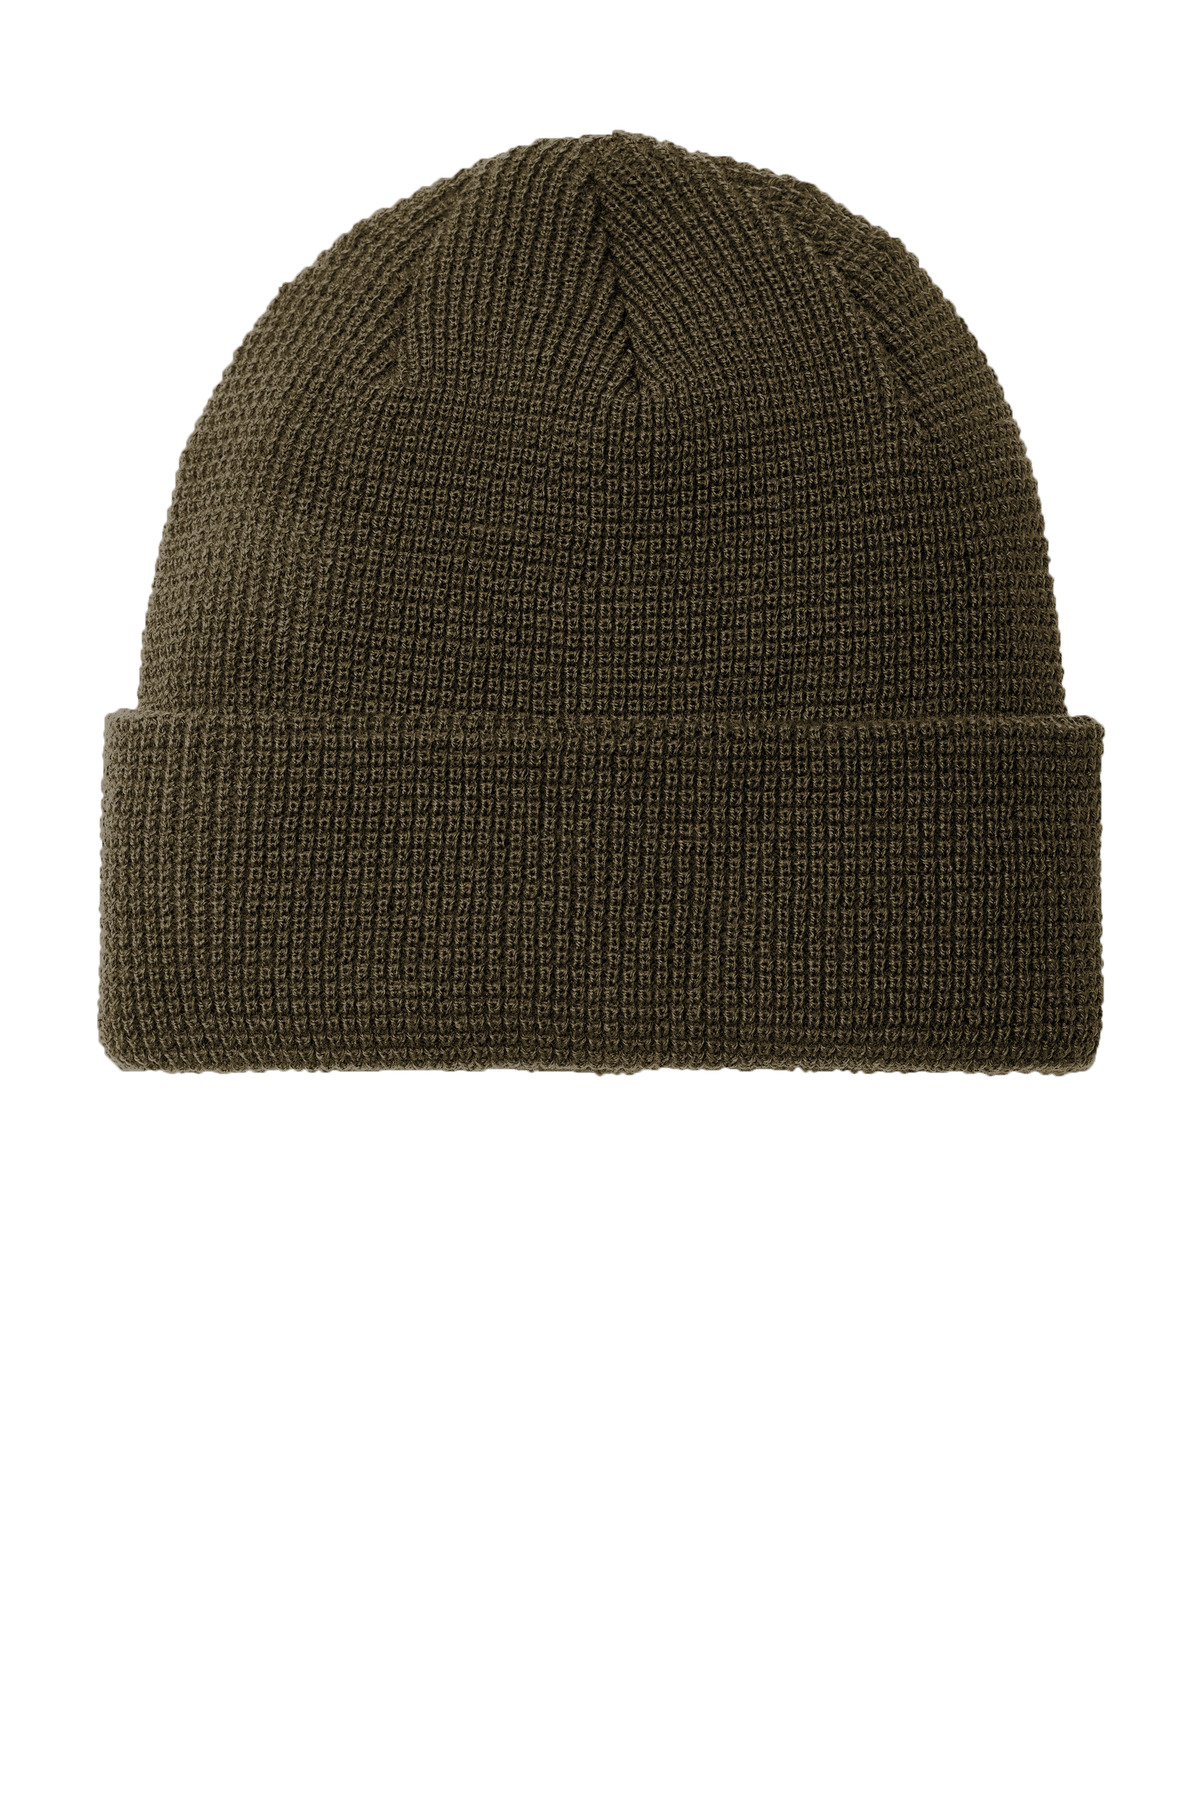 Port Authority Thermal Knit Cuffed Beanie-